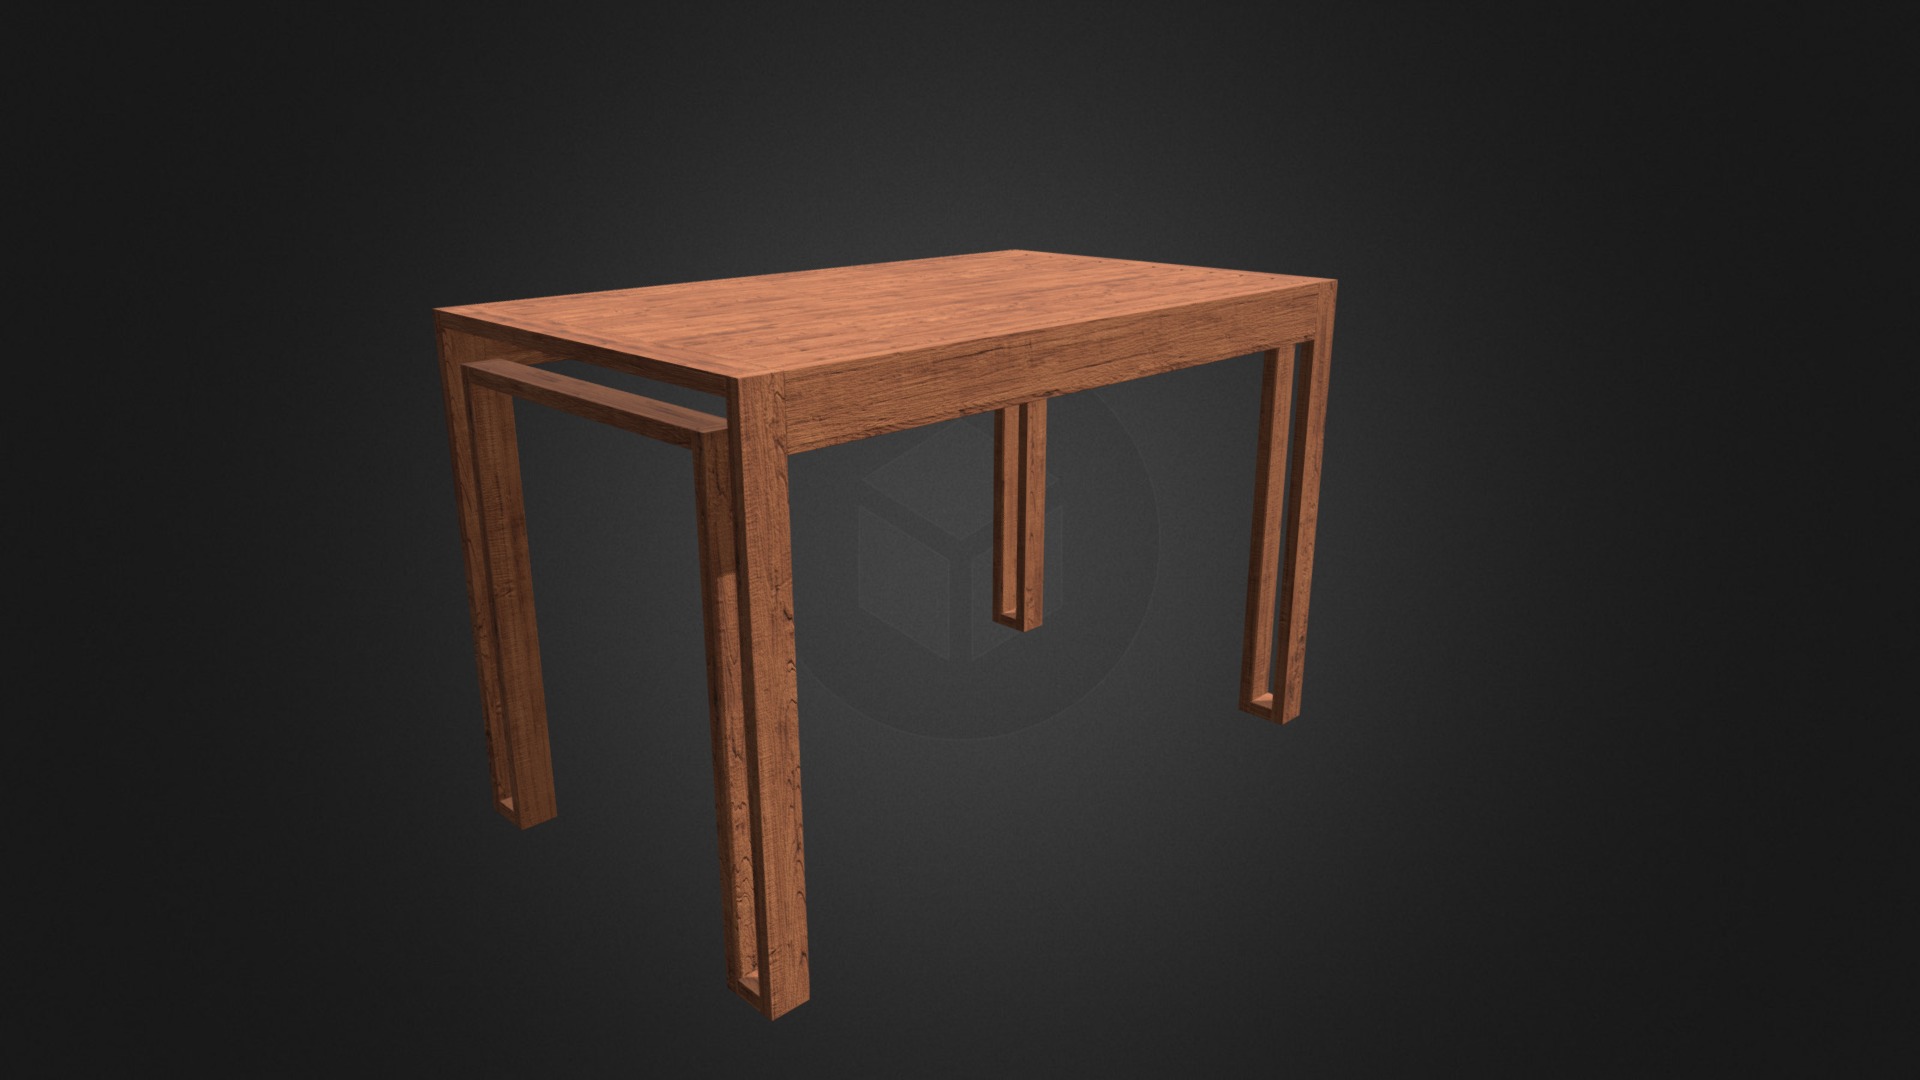 3D model Wooden Table - This is a 3D model of the Wooden Table. The 3D model is about a wooden table with a glass top.